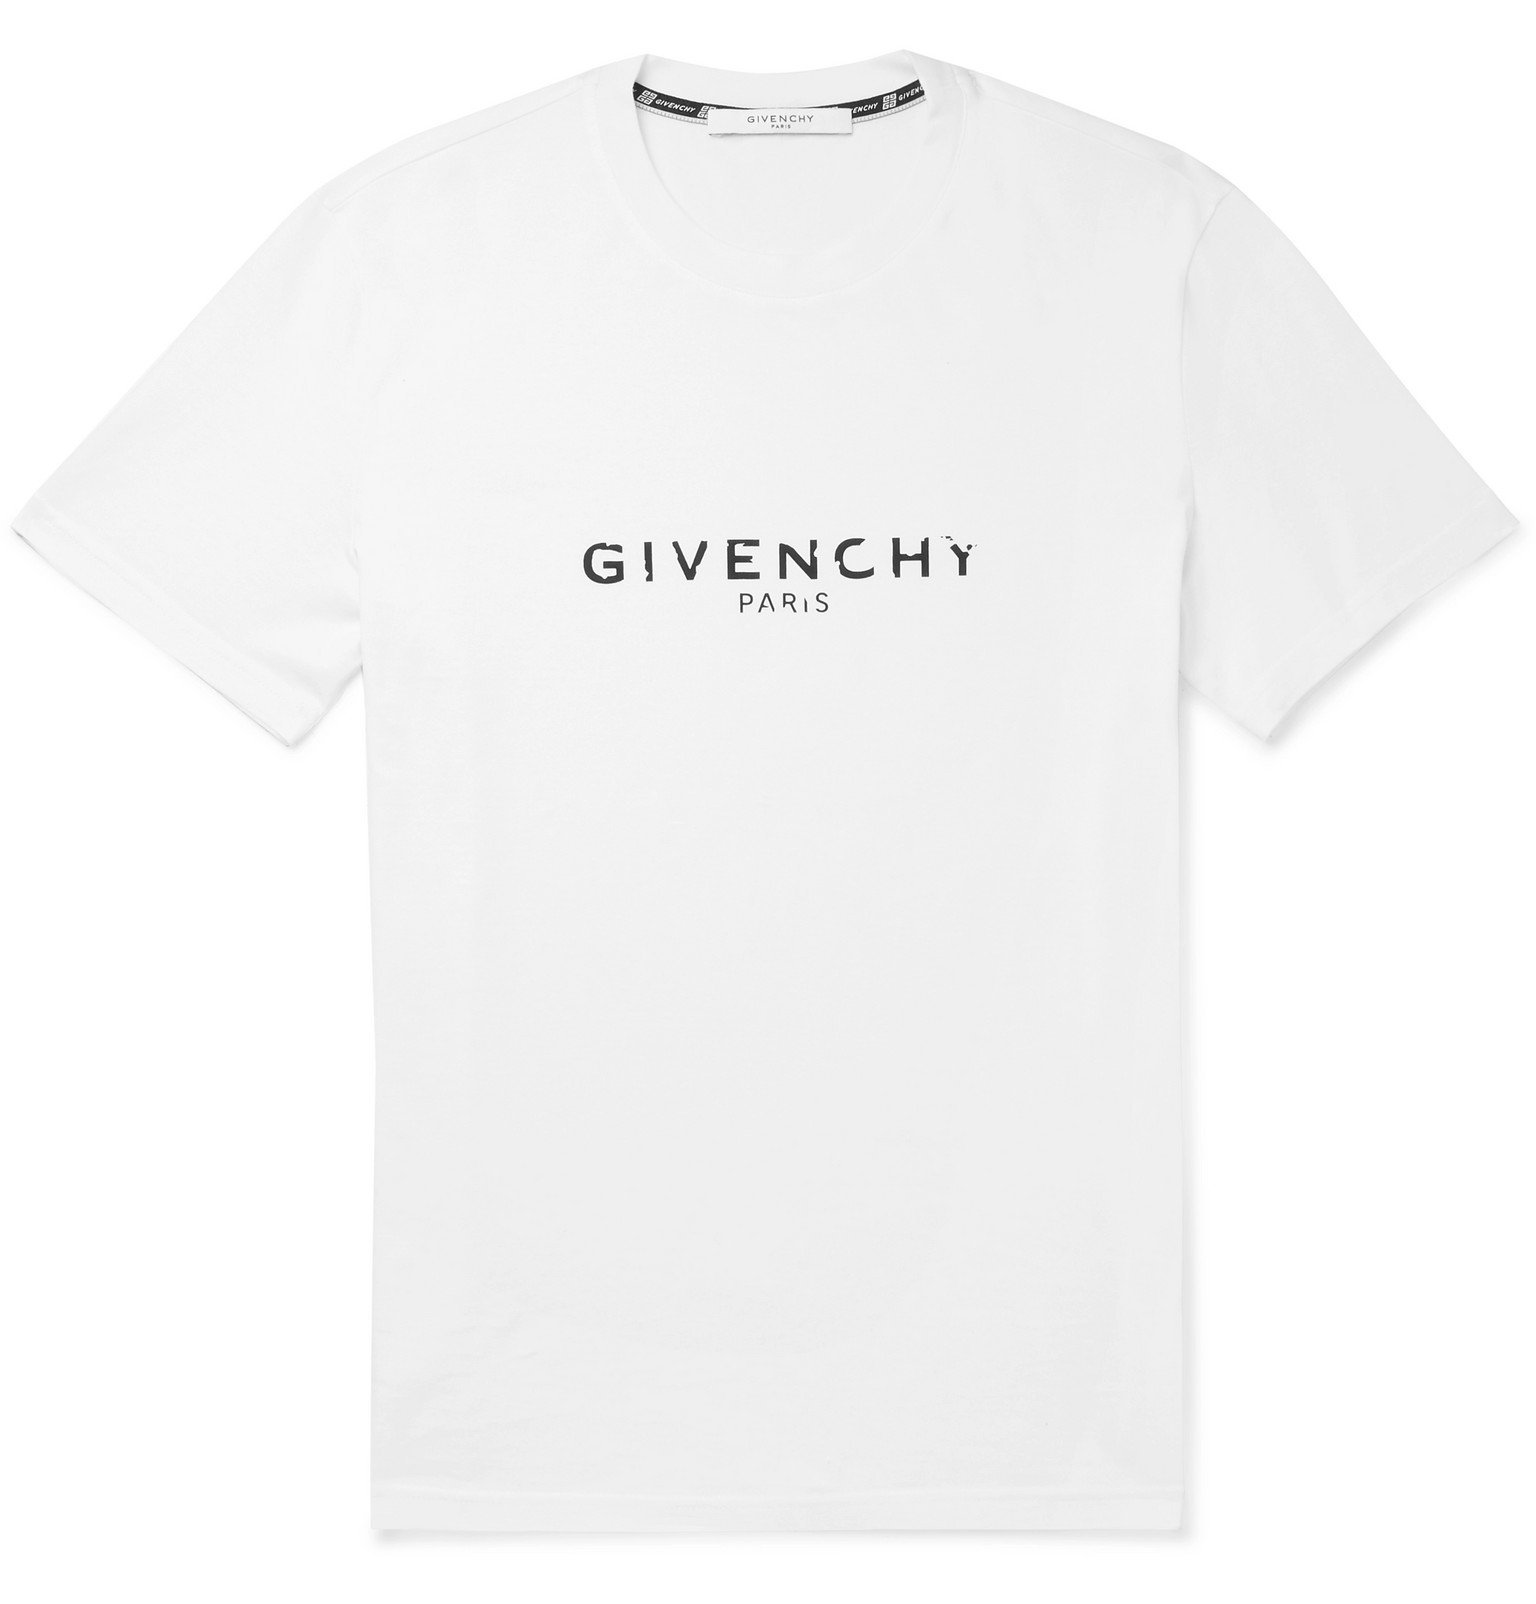 Givenchy - Slim-Fit Logo-Print Cotton-Jersey T-Shirt - White Givenchy